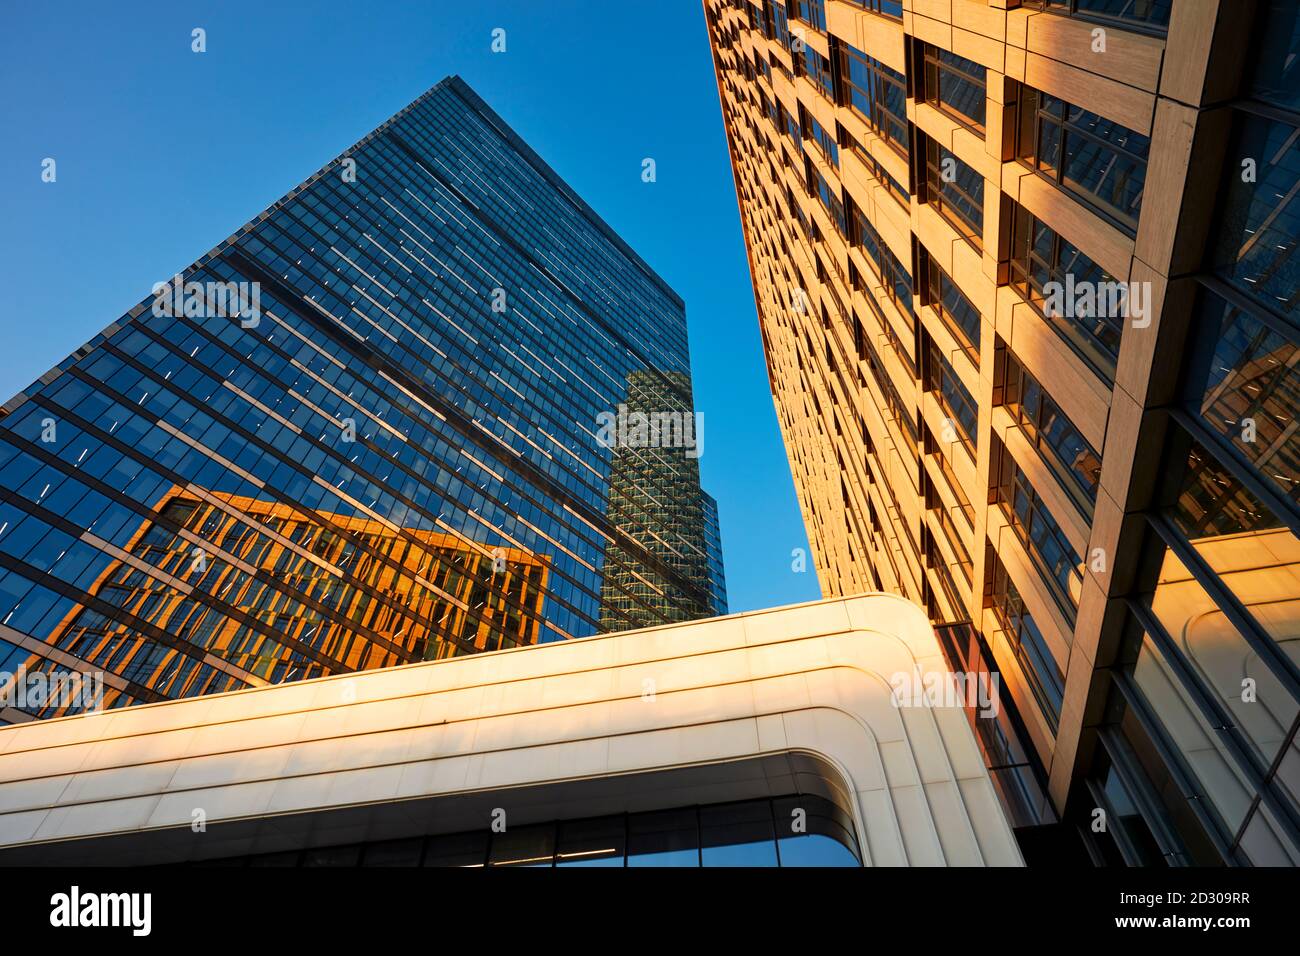 High rise modern buildings of Moscow International Business Centre (MIBC), also known as “Moscow City'. Moscow, Russia. Stock Photo